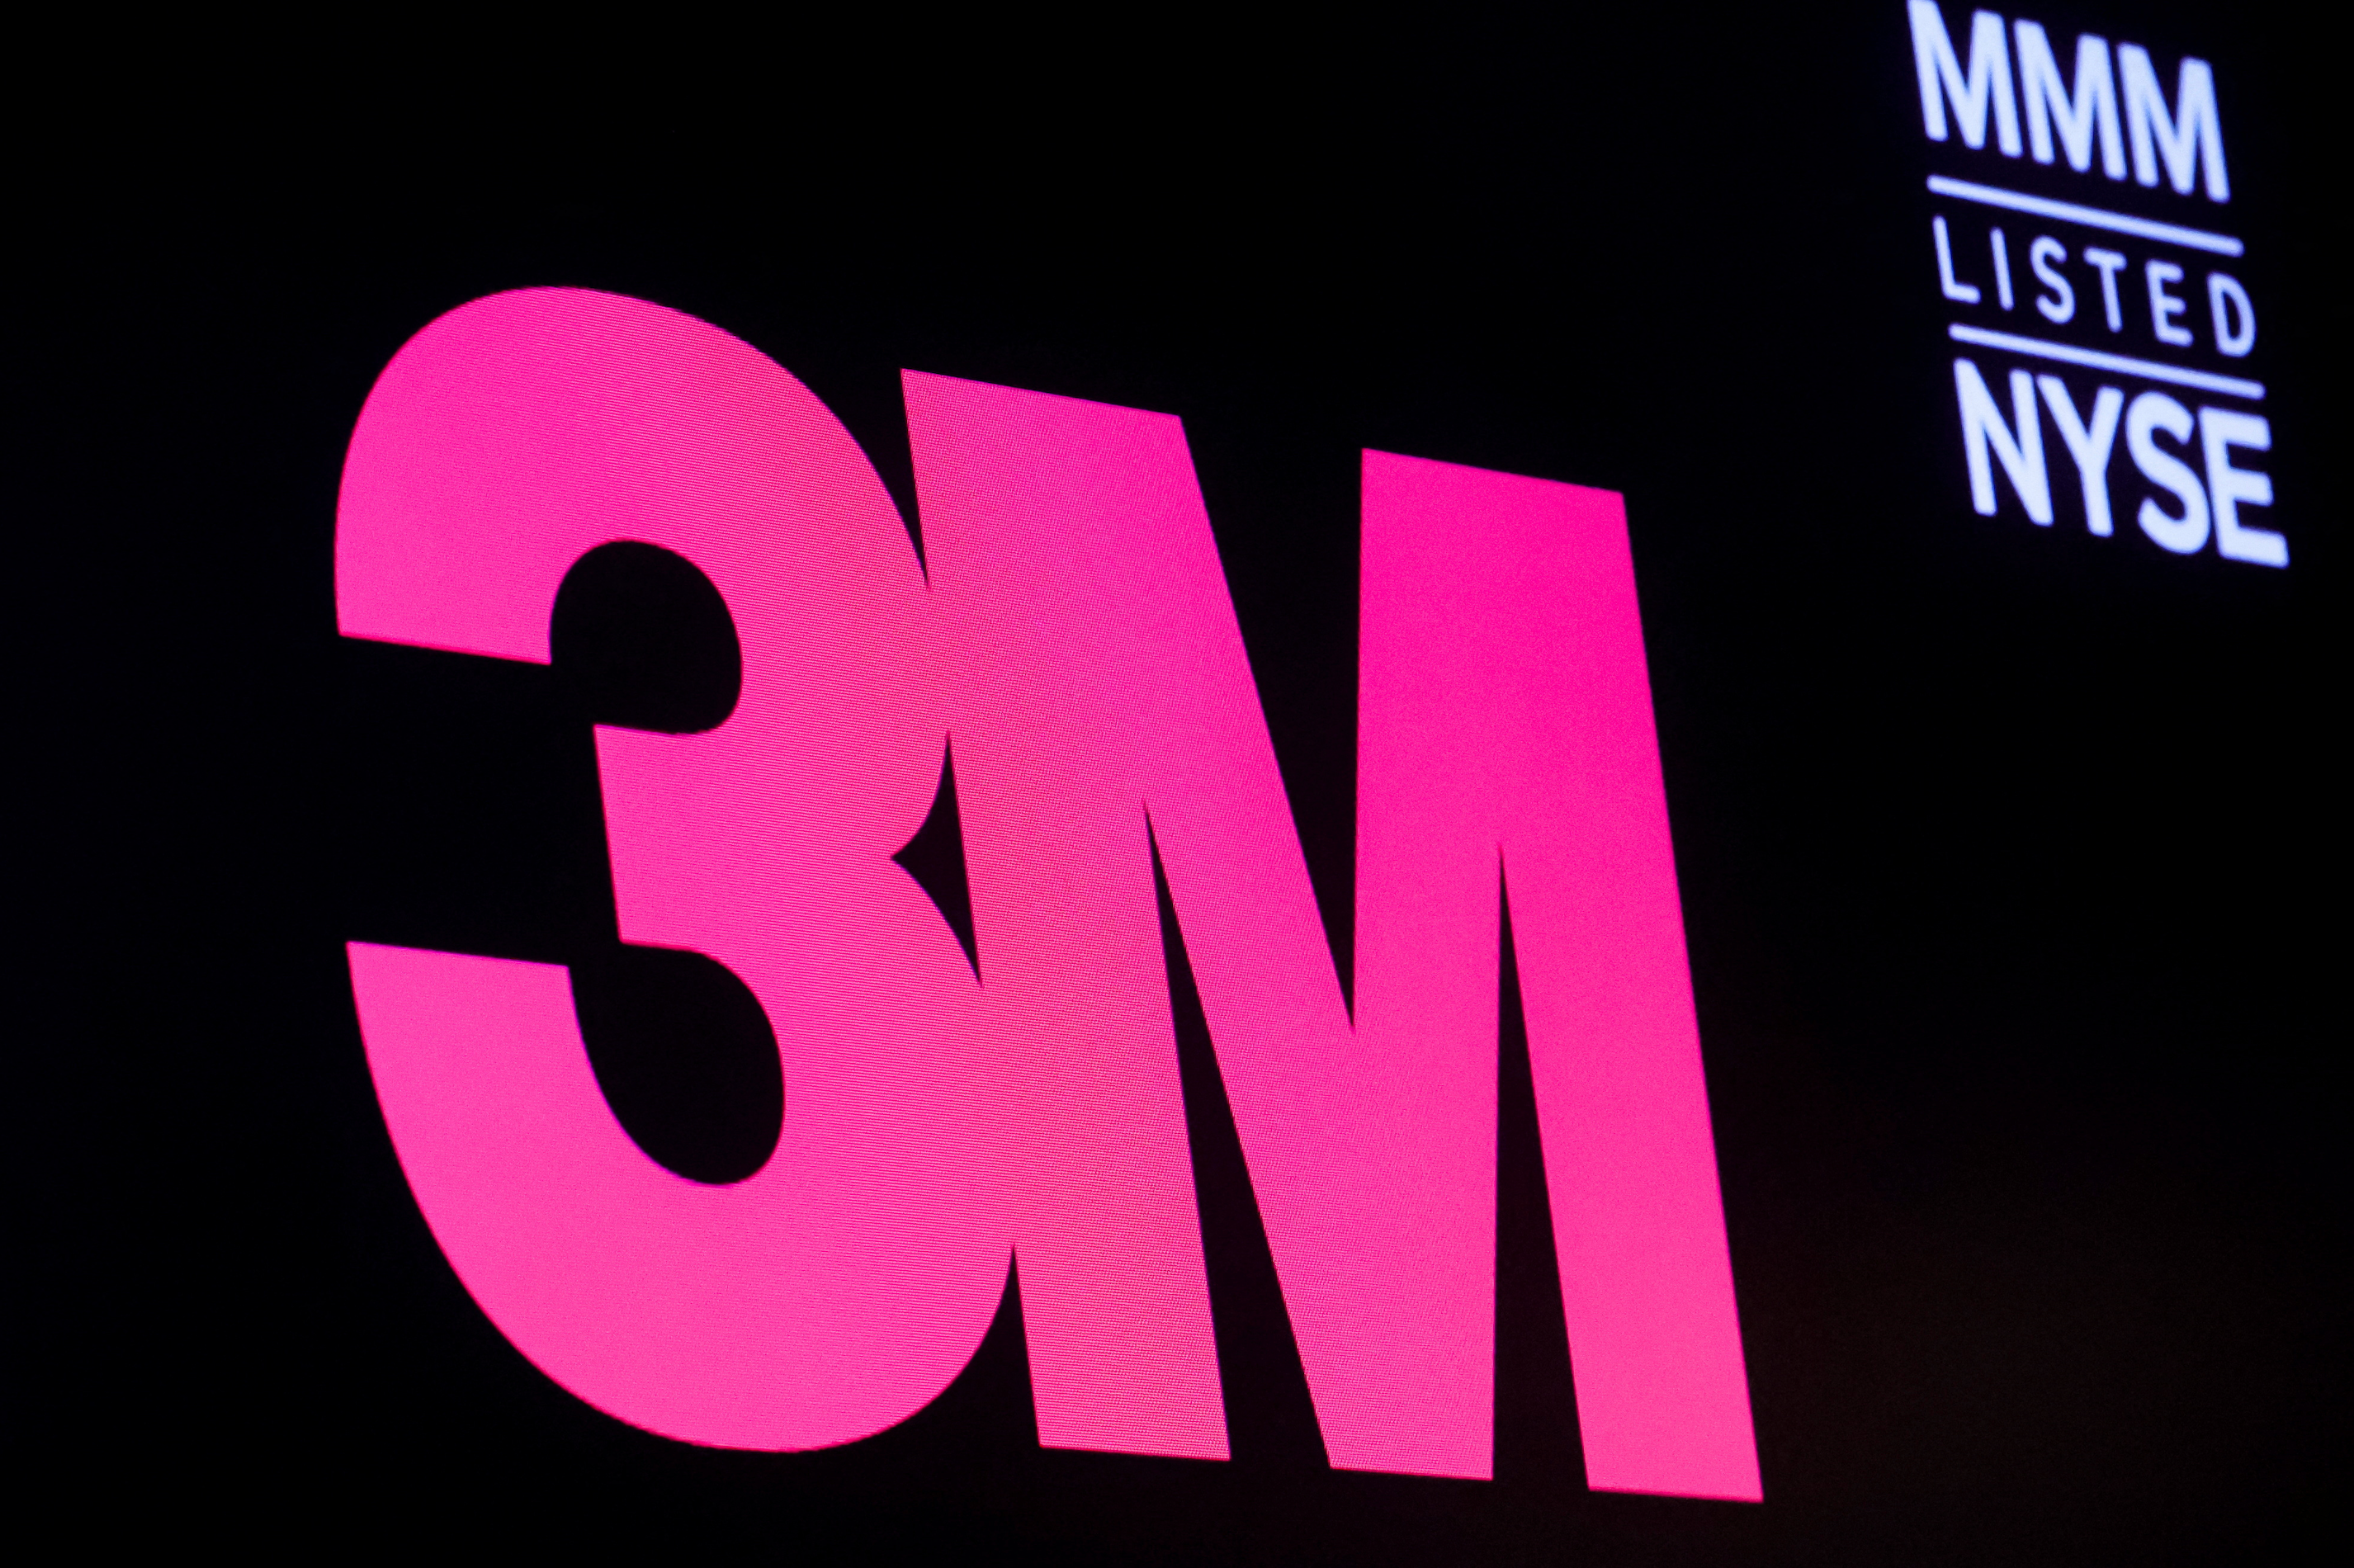 3M agrees to pay $6B in US military earplug lawsuit settlement